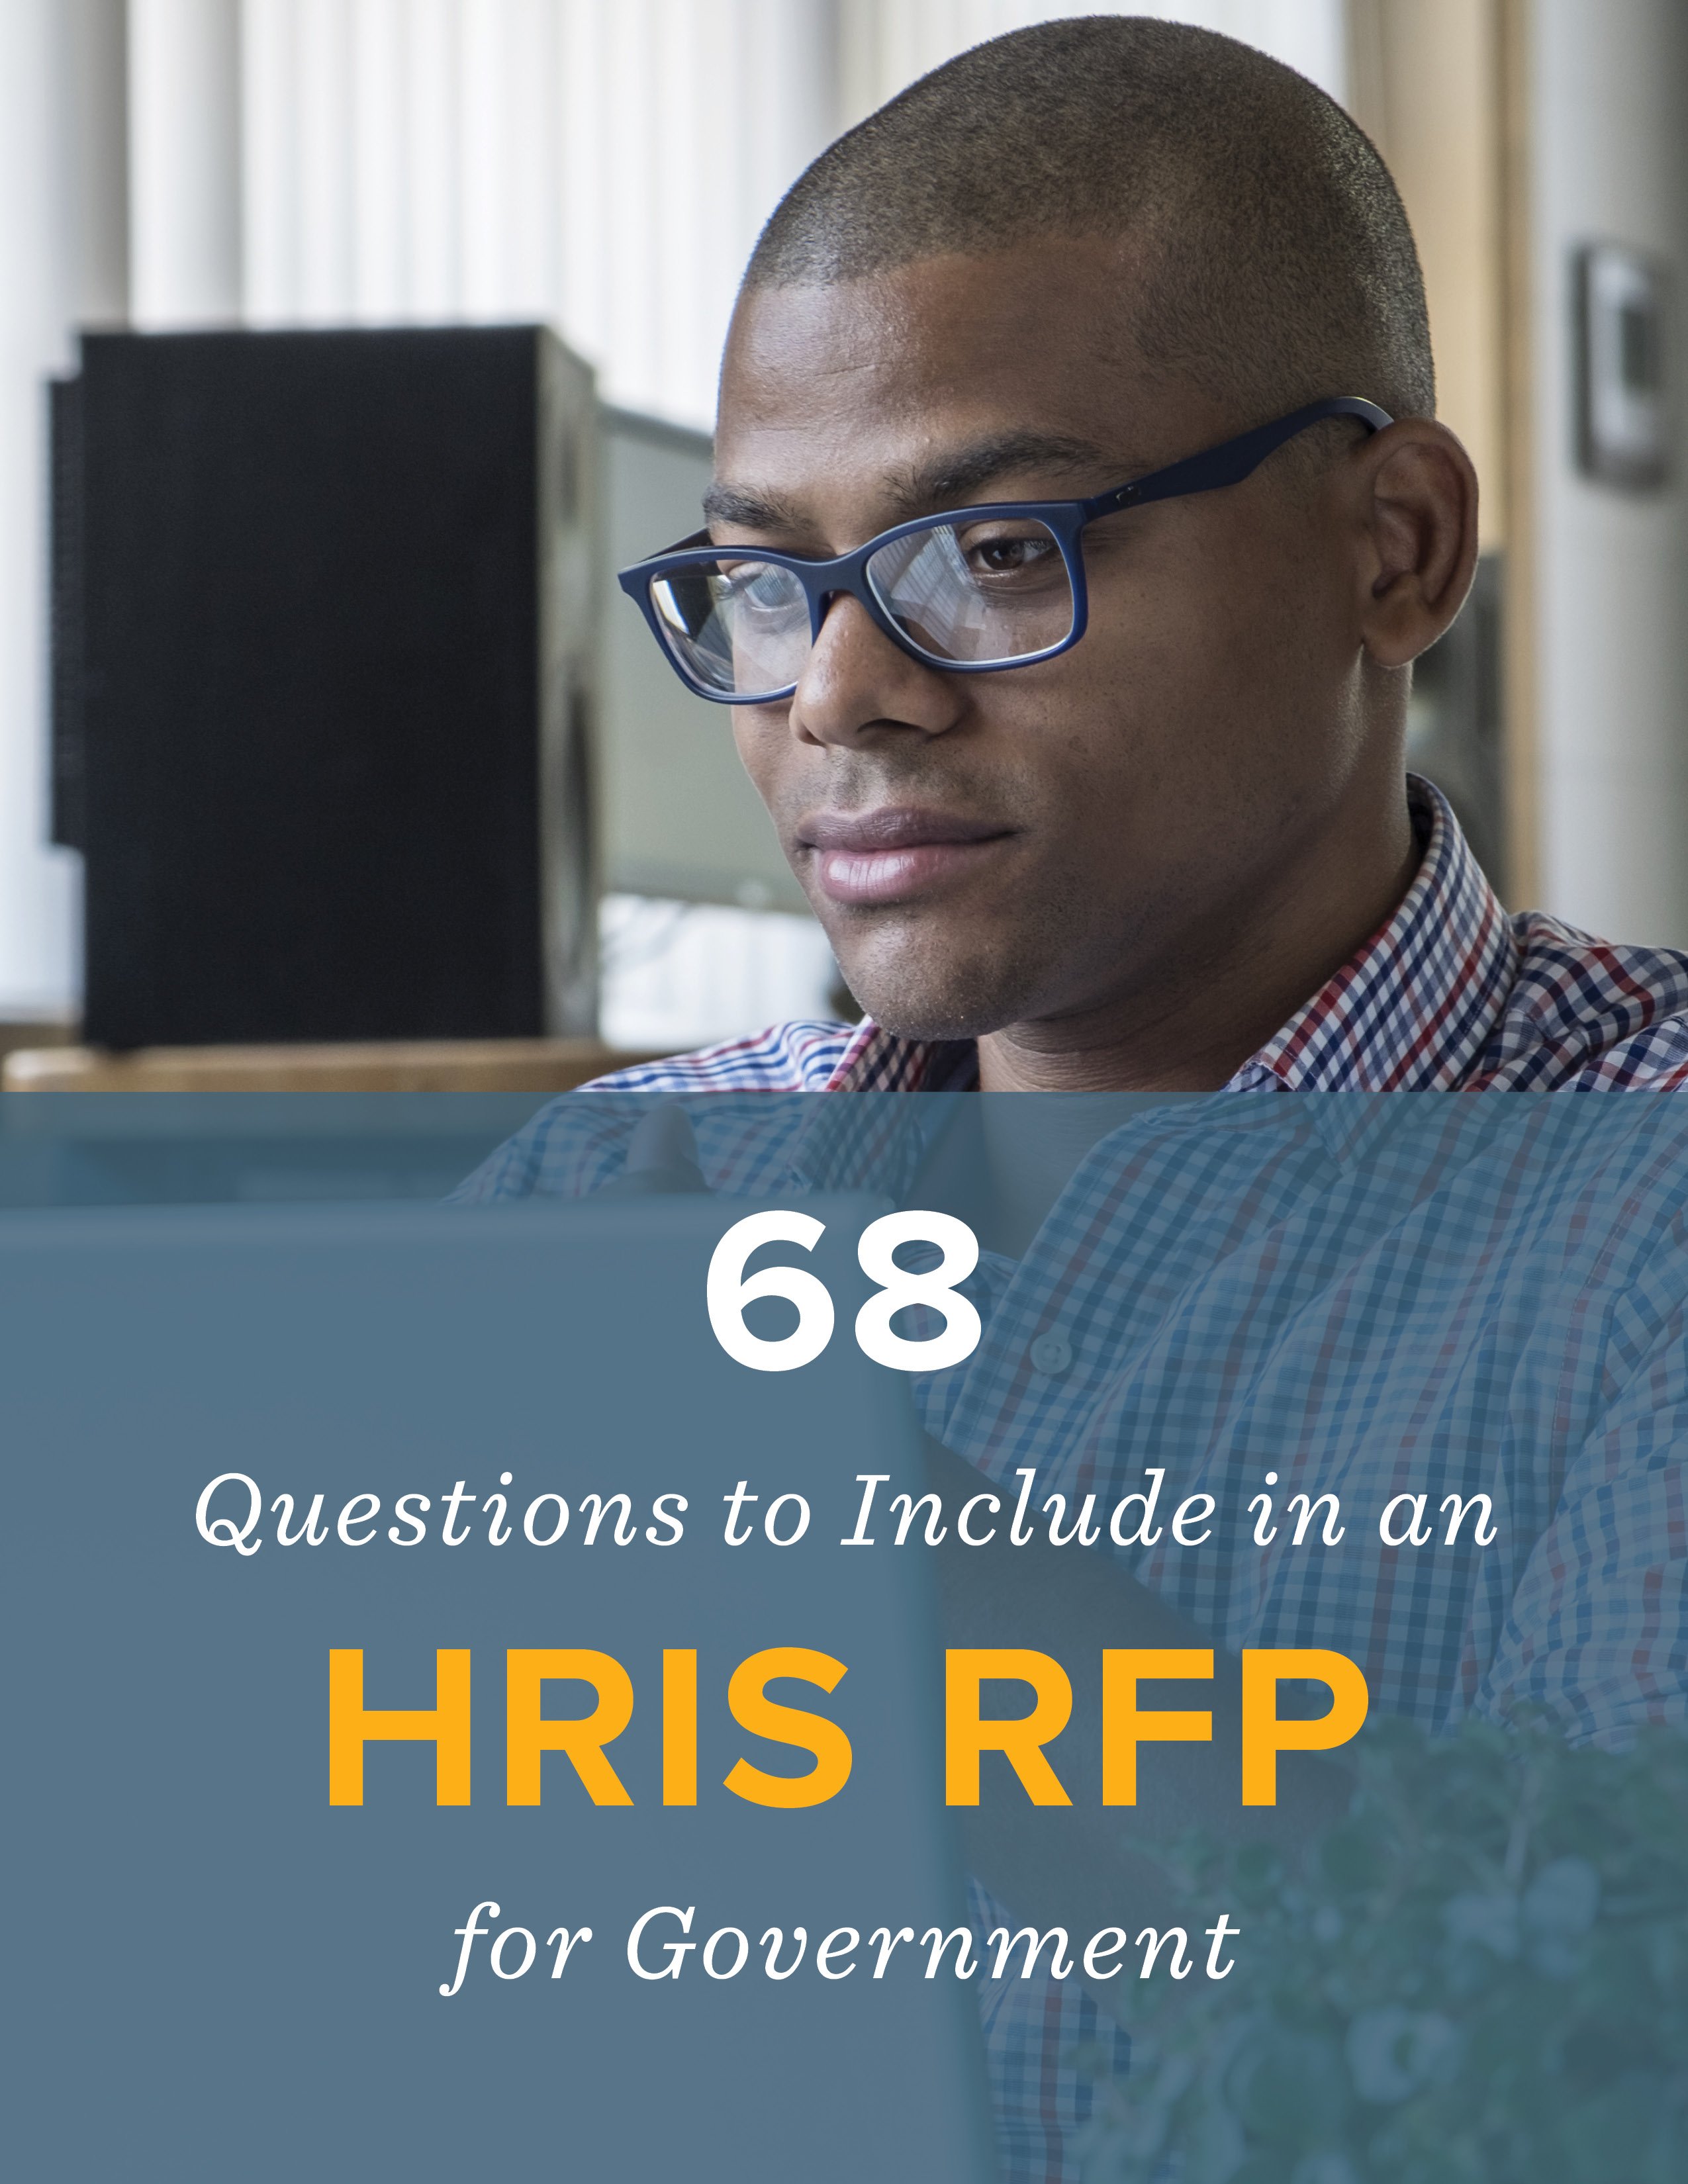 68 Questions to Include in an HRIS RFP for Government